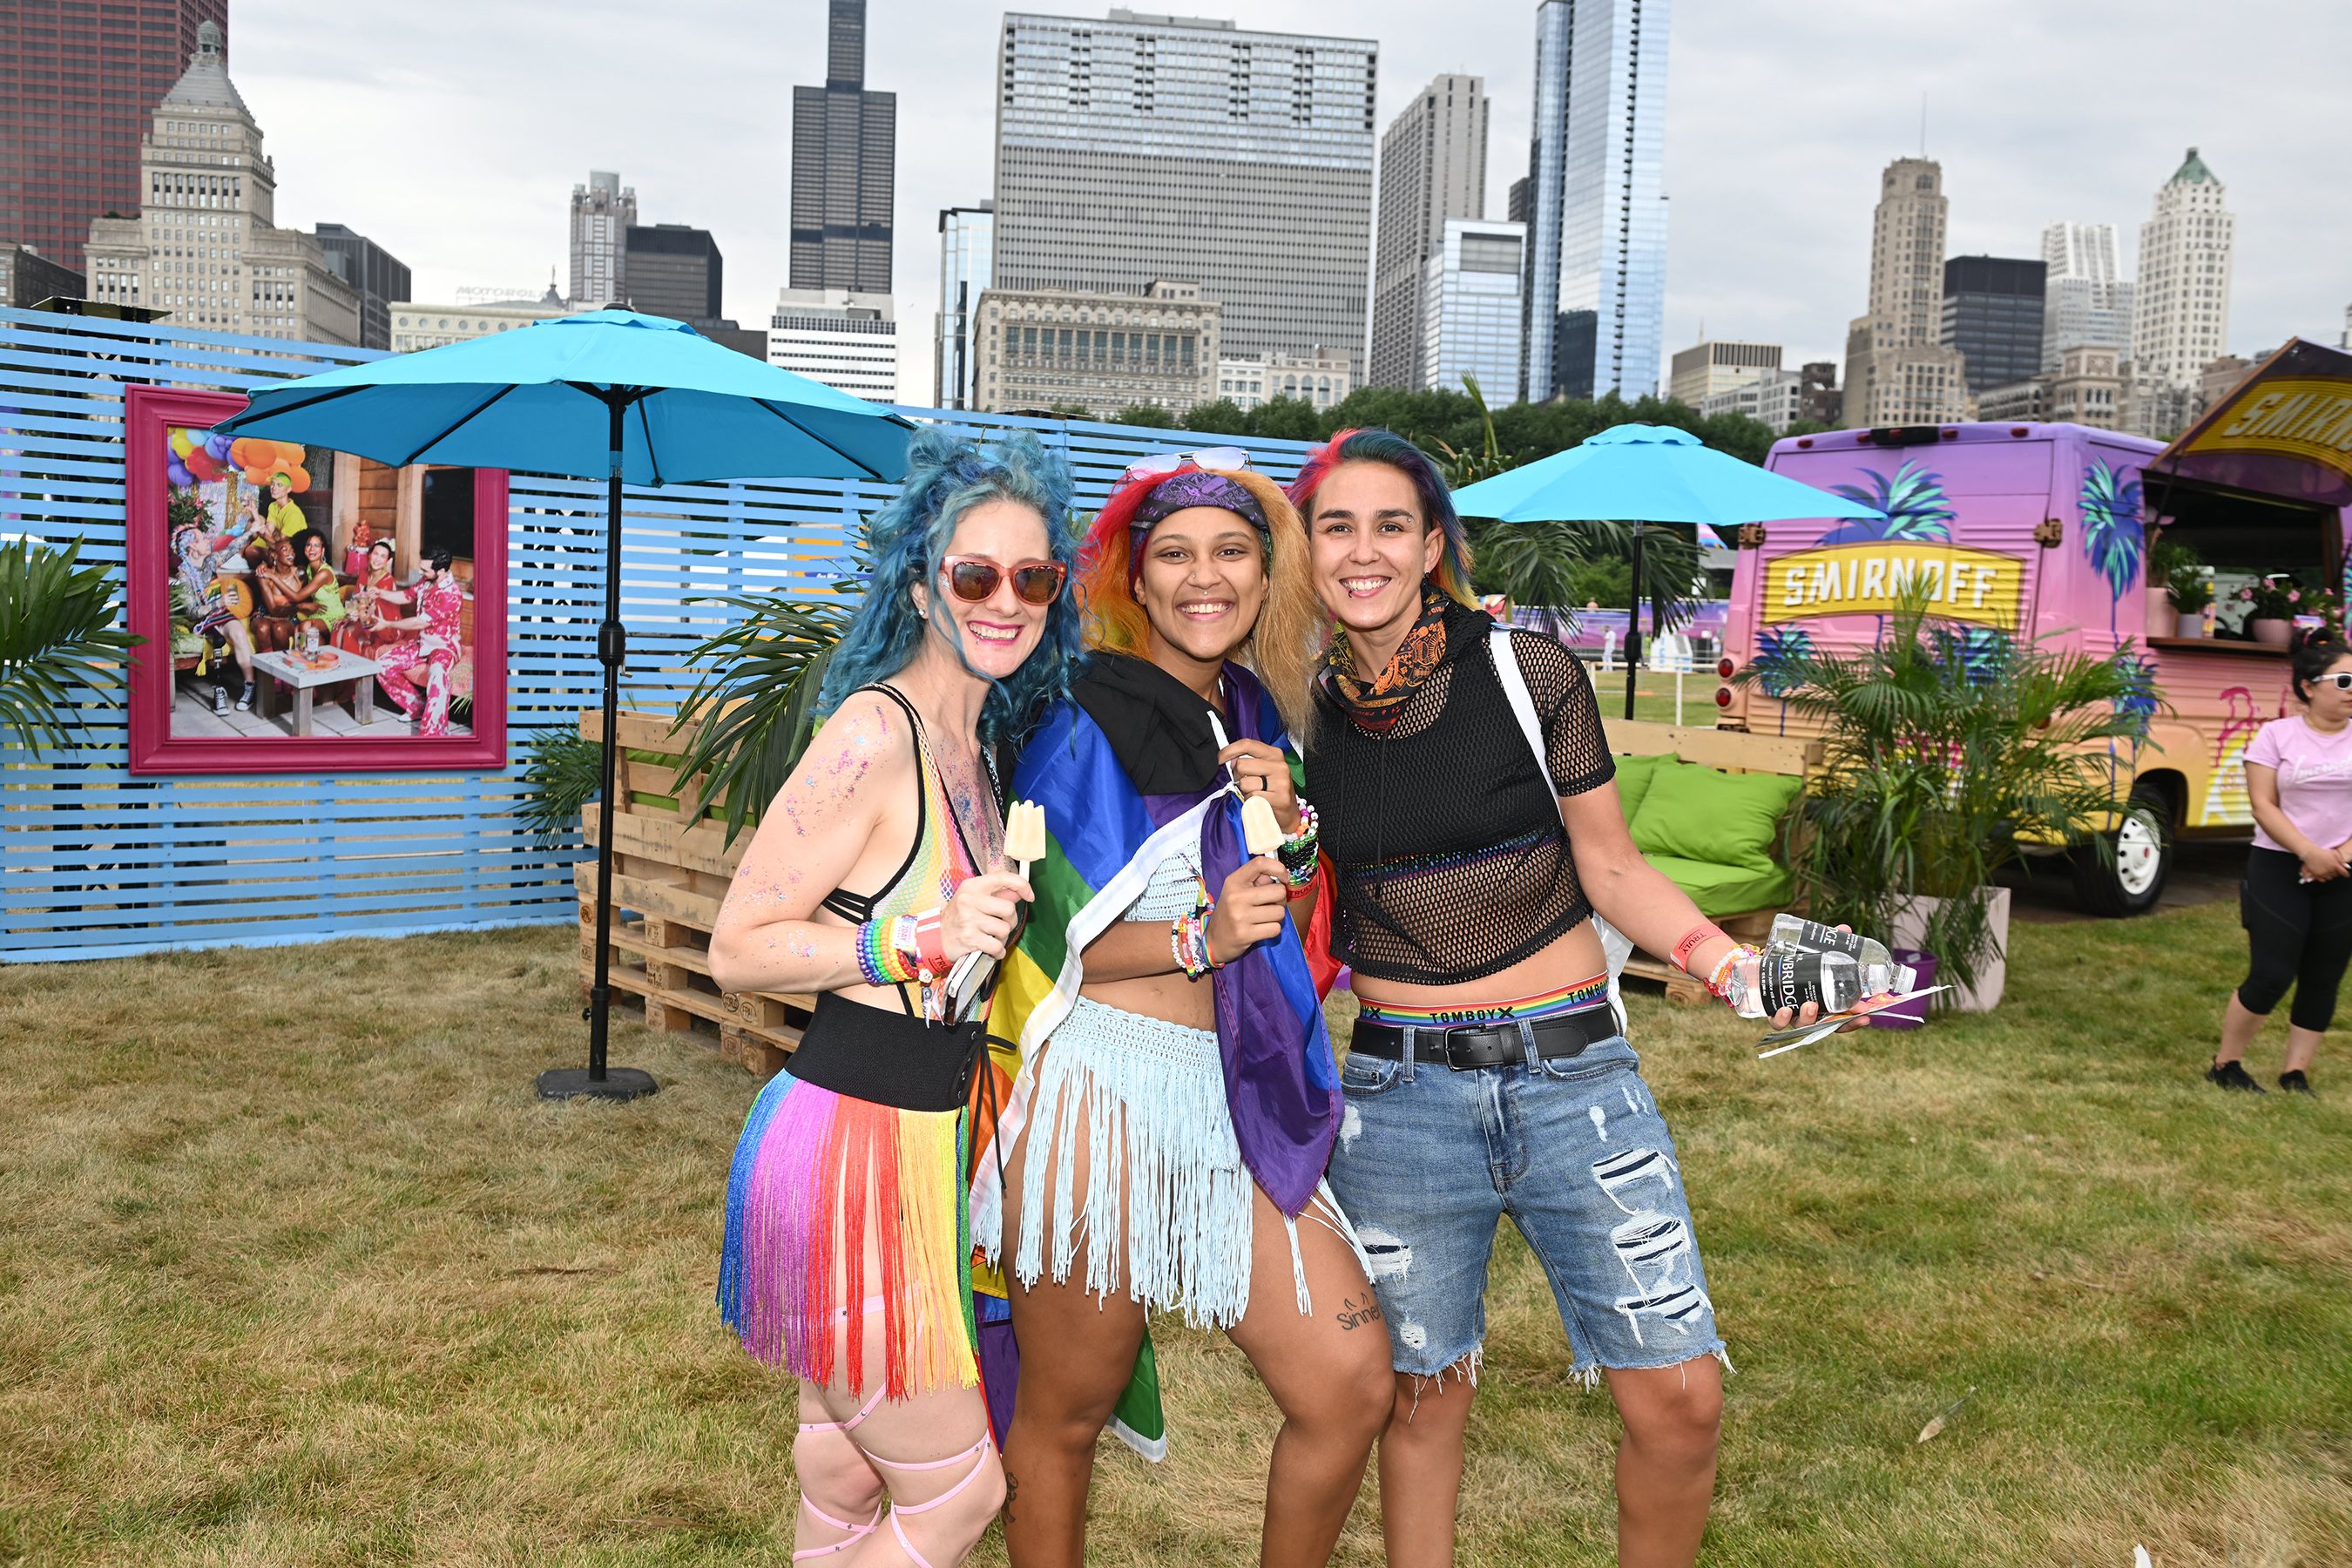 Smirnoff Showed Up and Showed Off at Pride in the Park on Saturday June, 25 to announce plans to host the most inclusive drag competition ever.